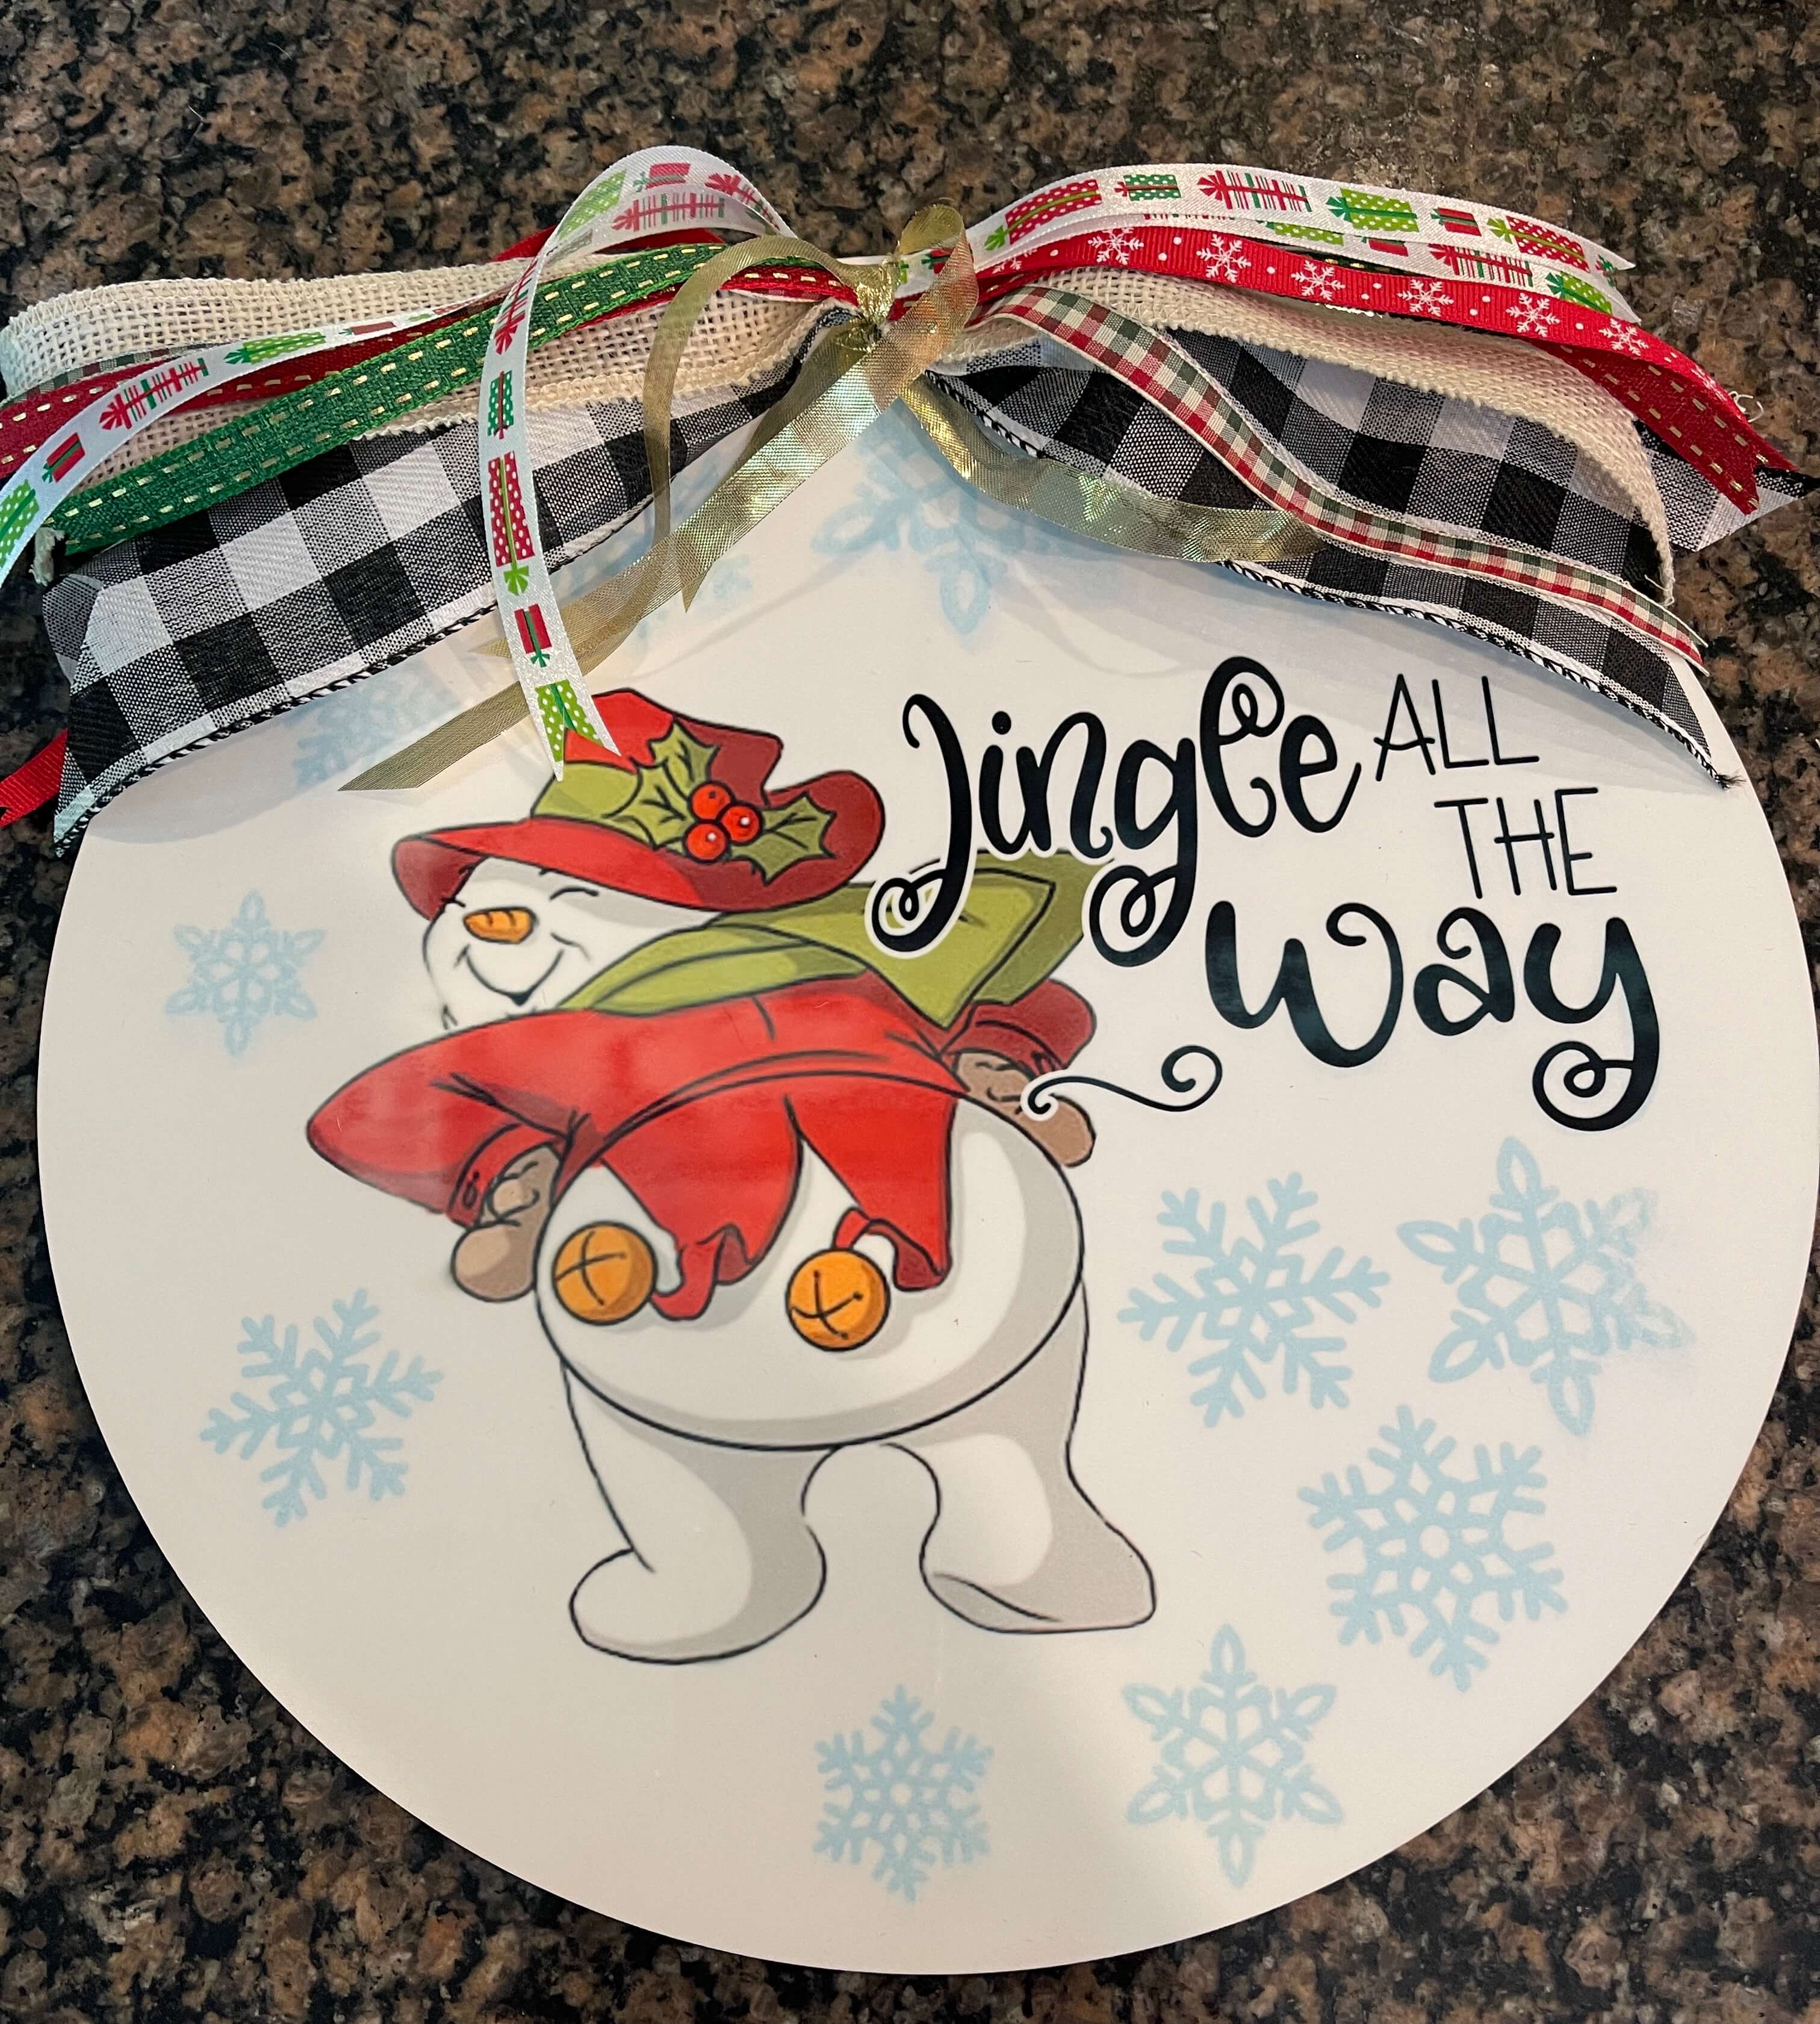 Large round home decor personalized with a snowman, "Jingle all the way" and a ribbon